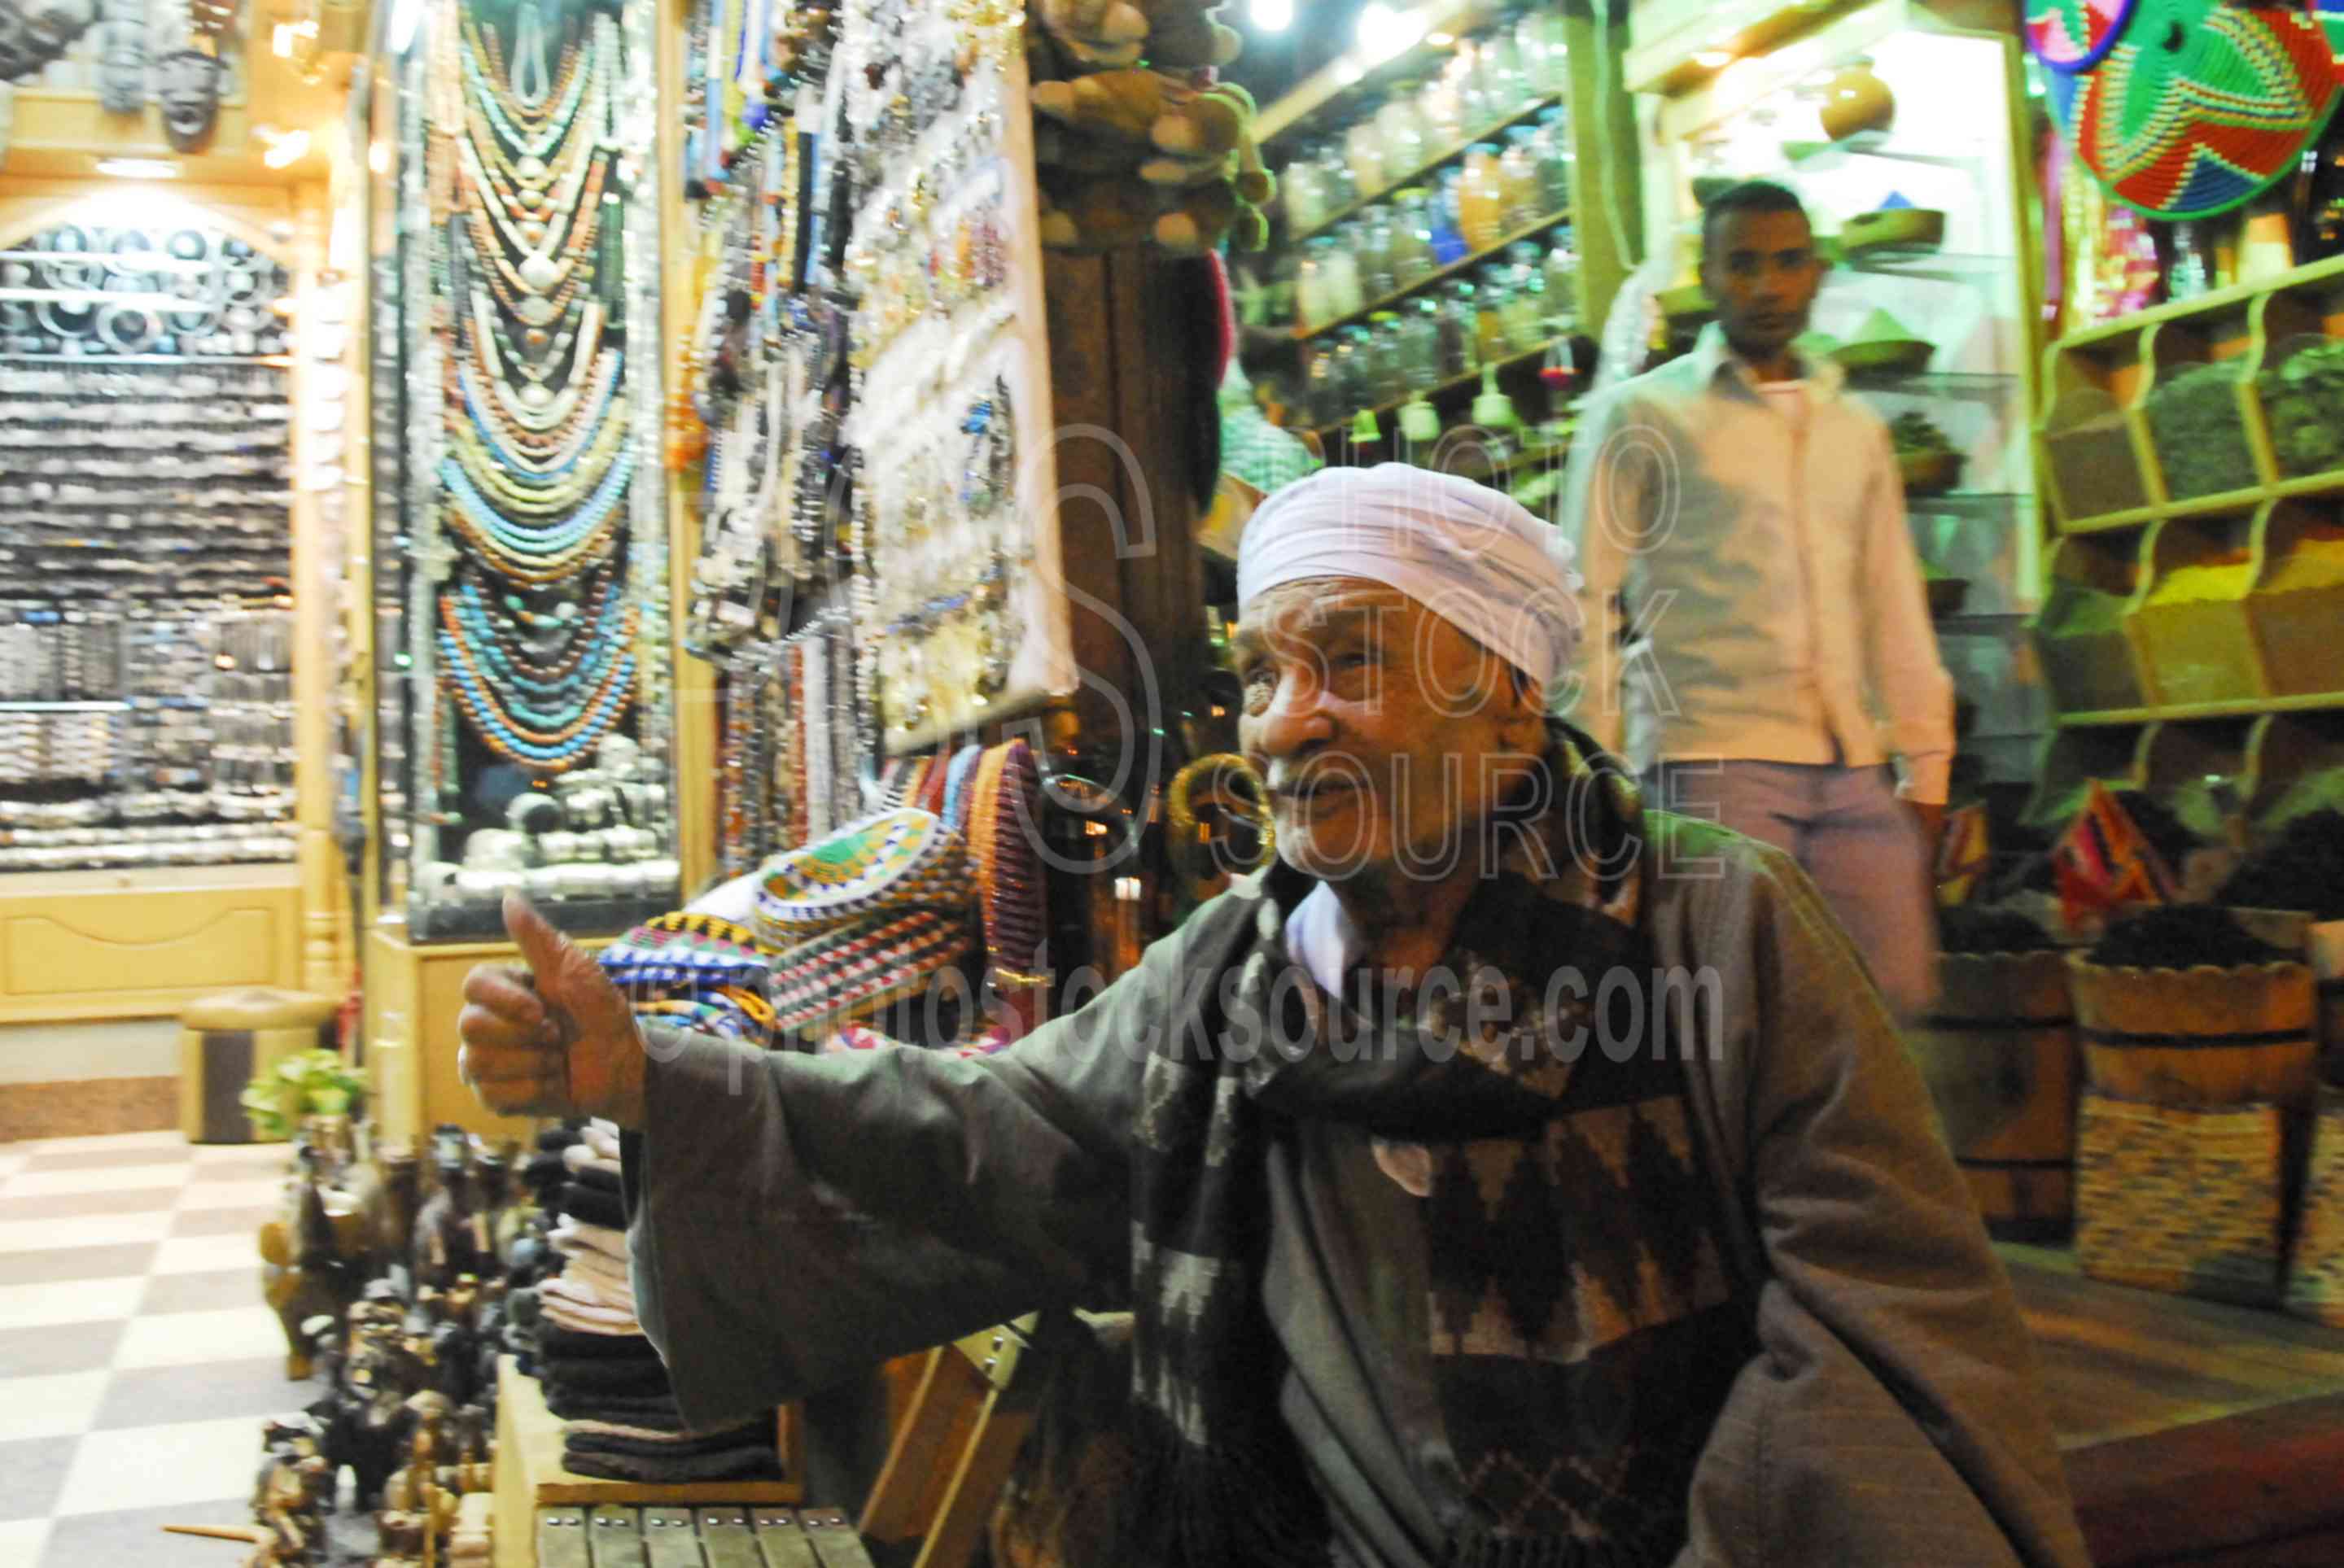 Sharia as Souq at Night,people,shopping,shops,goods,sale,vendor,markets